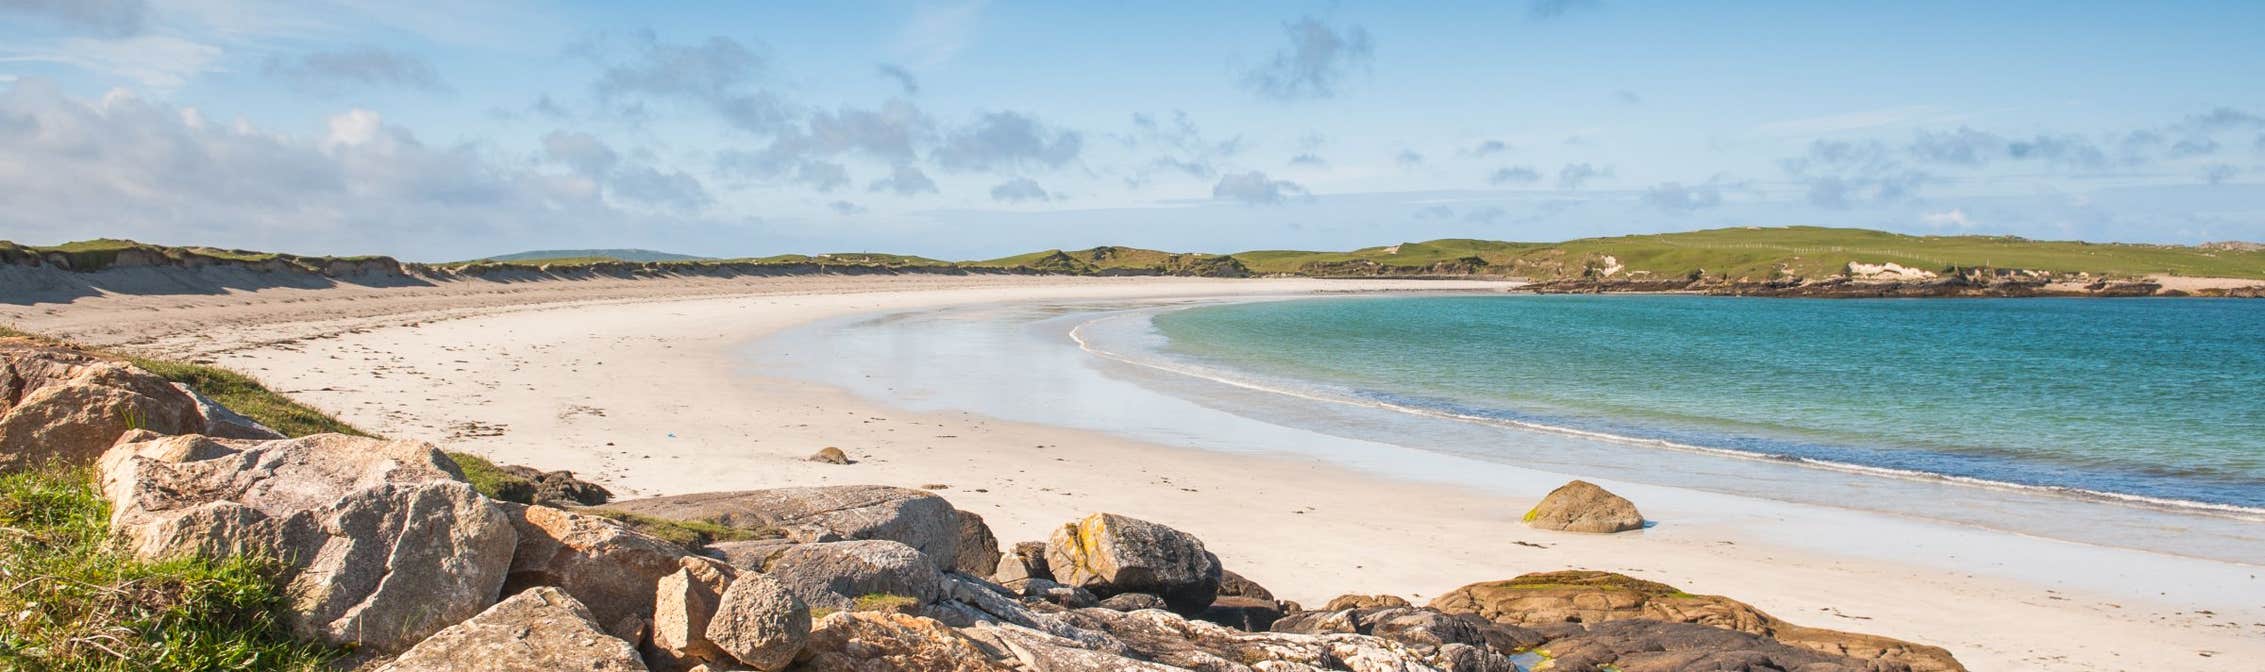 Pristine white sand and blue waters at Dog's Bay Beach, Connemara, County Galway